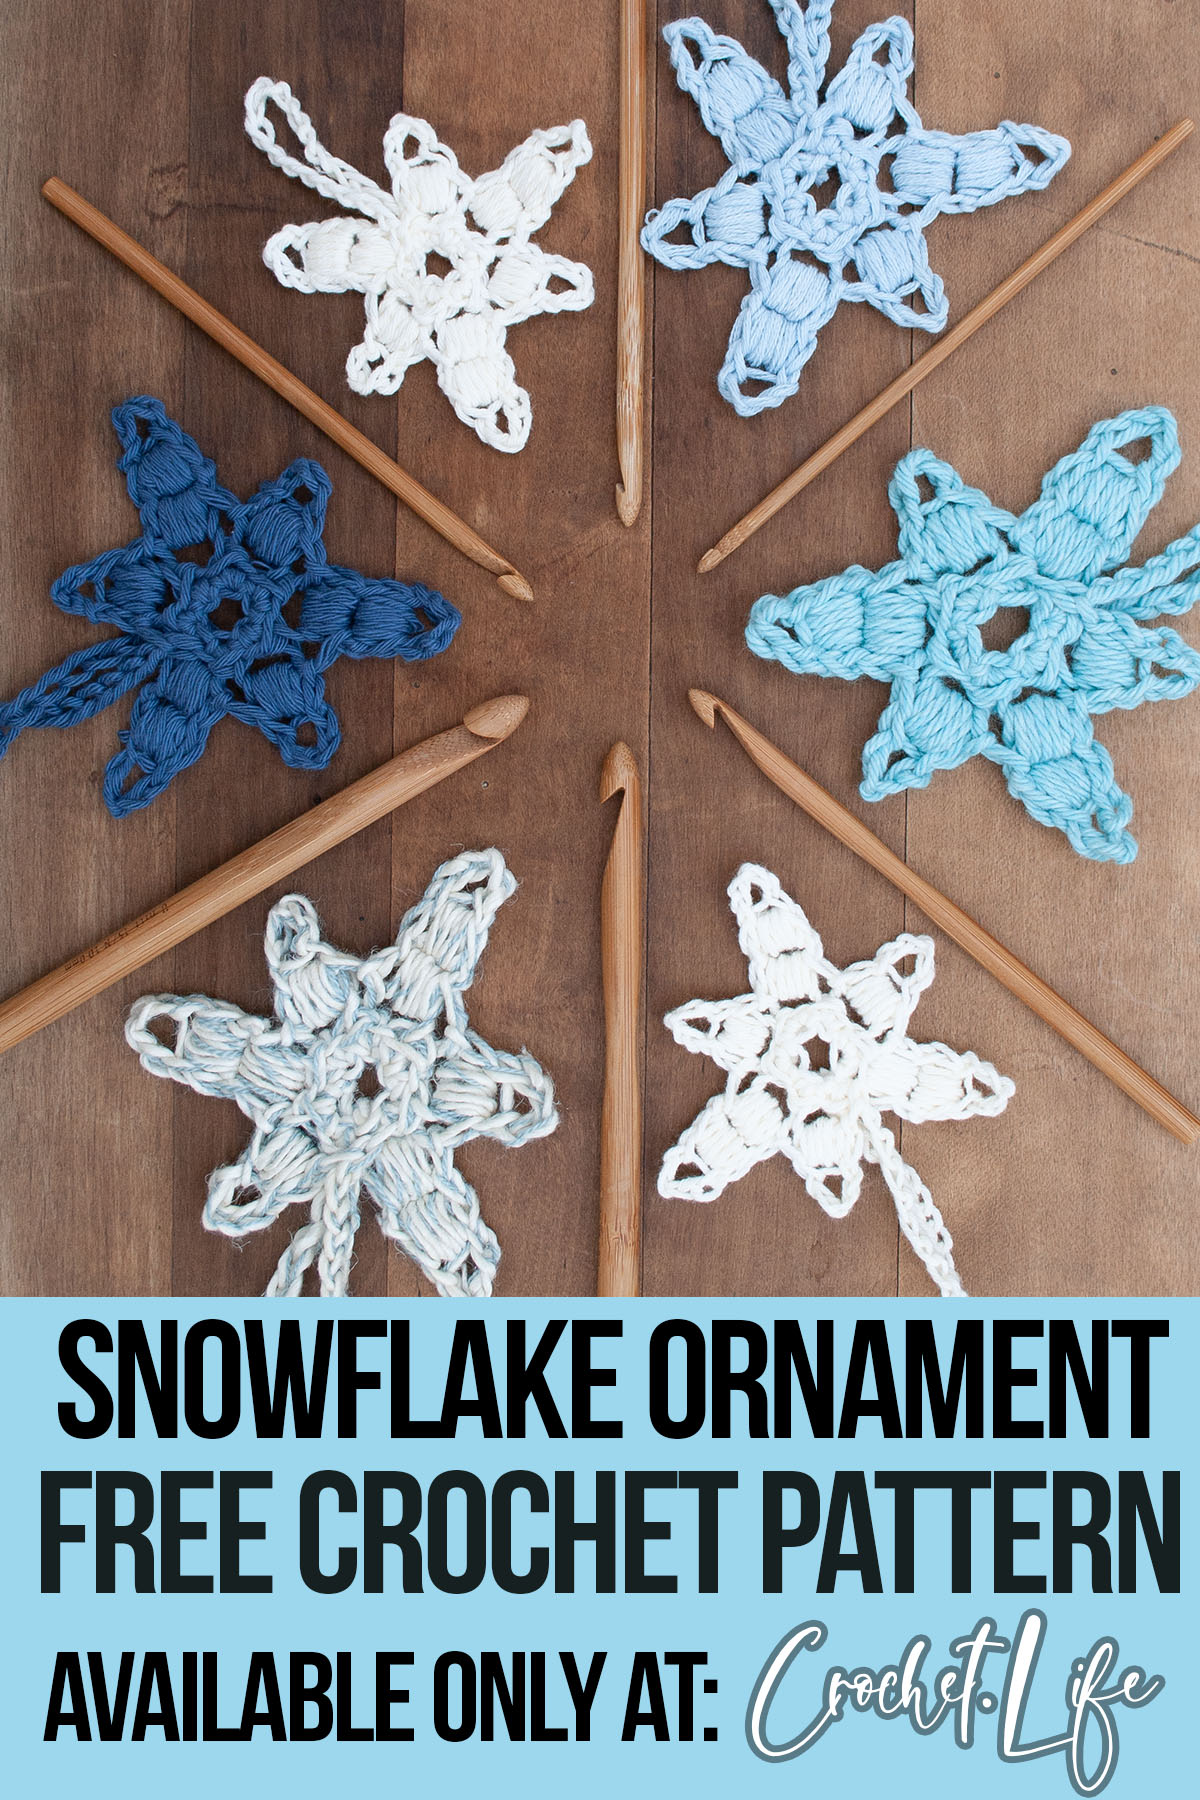 snowflake crochet pattern with text which reads snowflake ornament free crochet pattern available only at crochet.life